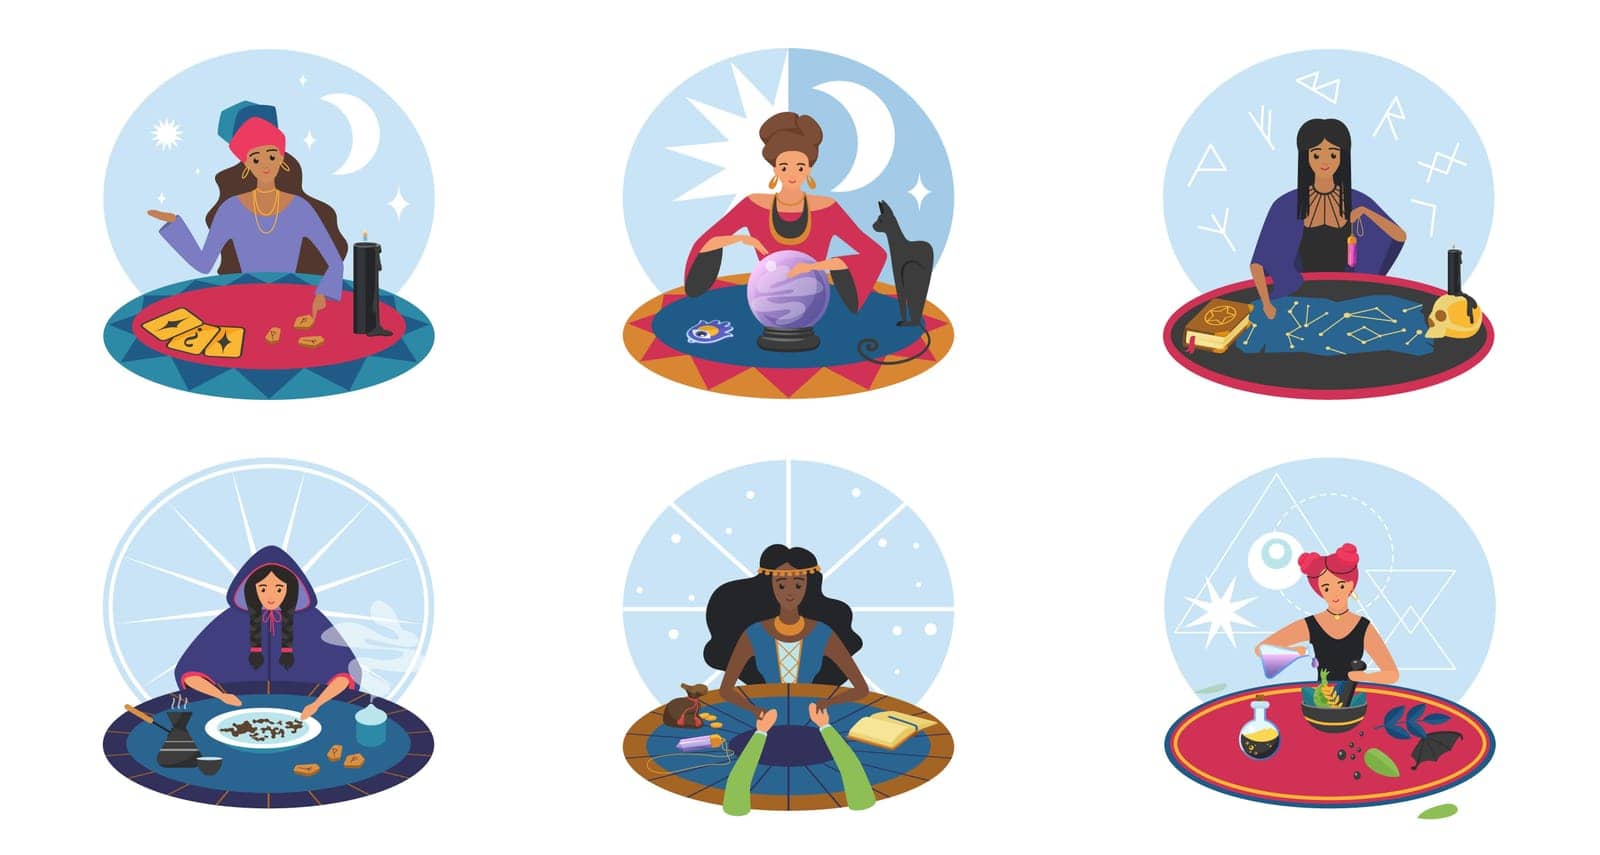 Fortune telling, divination set vector illustration. Cartoon isolated magic scenes with fortuneteller, predictor or witch characters sitting at round table to predict destiny with crystal ball, tarot